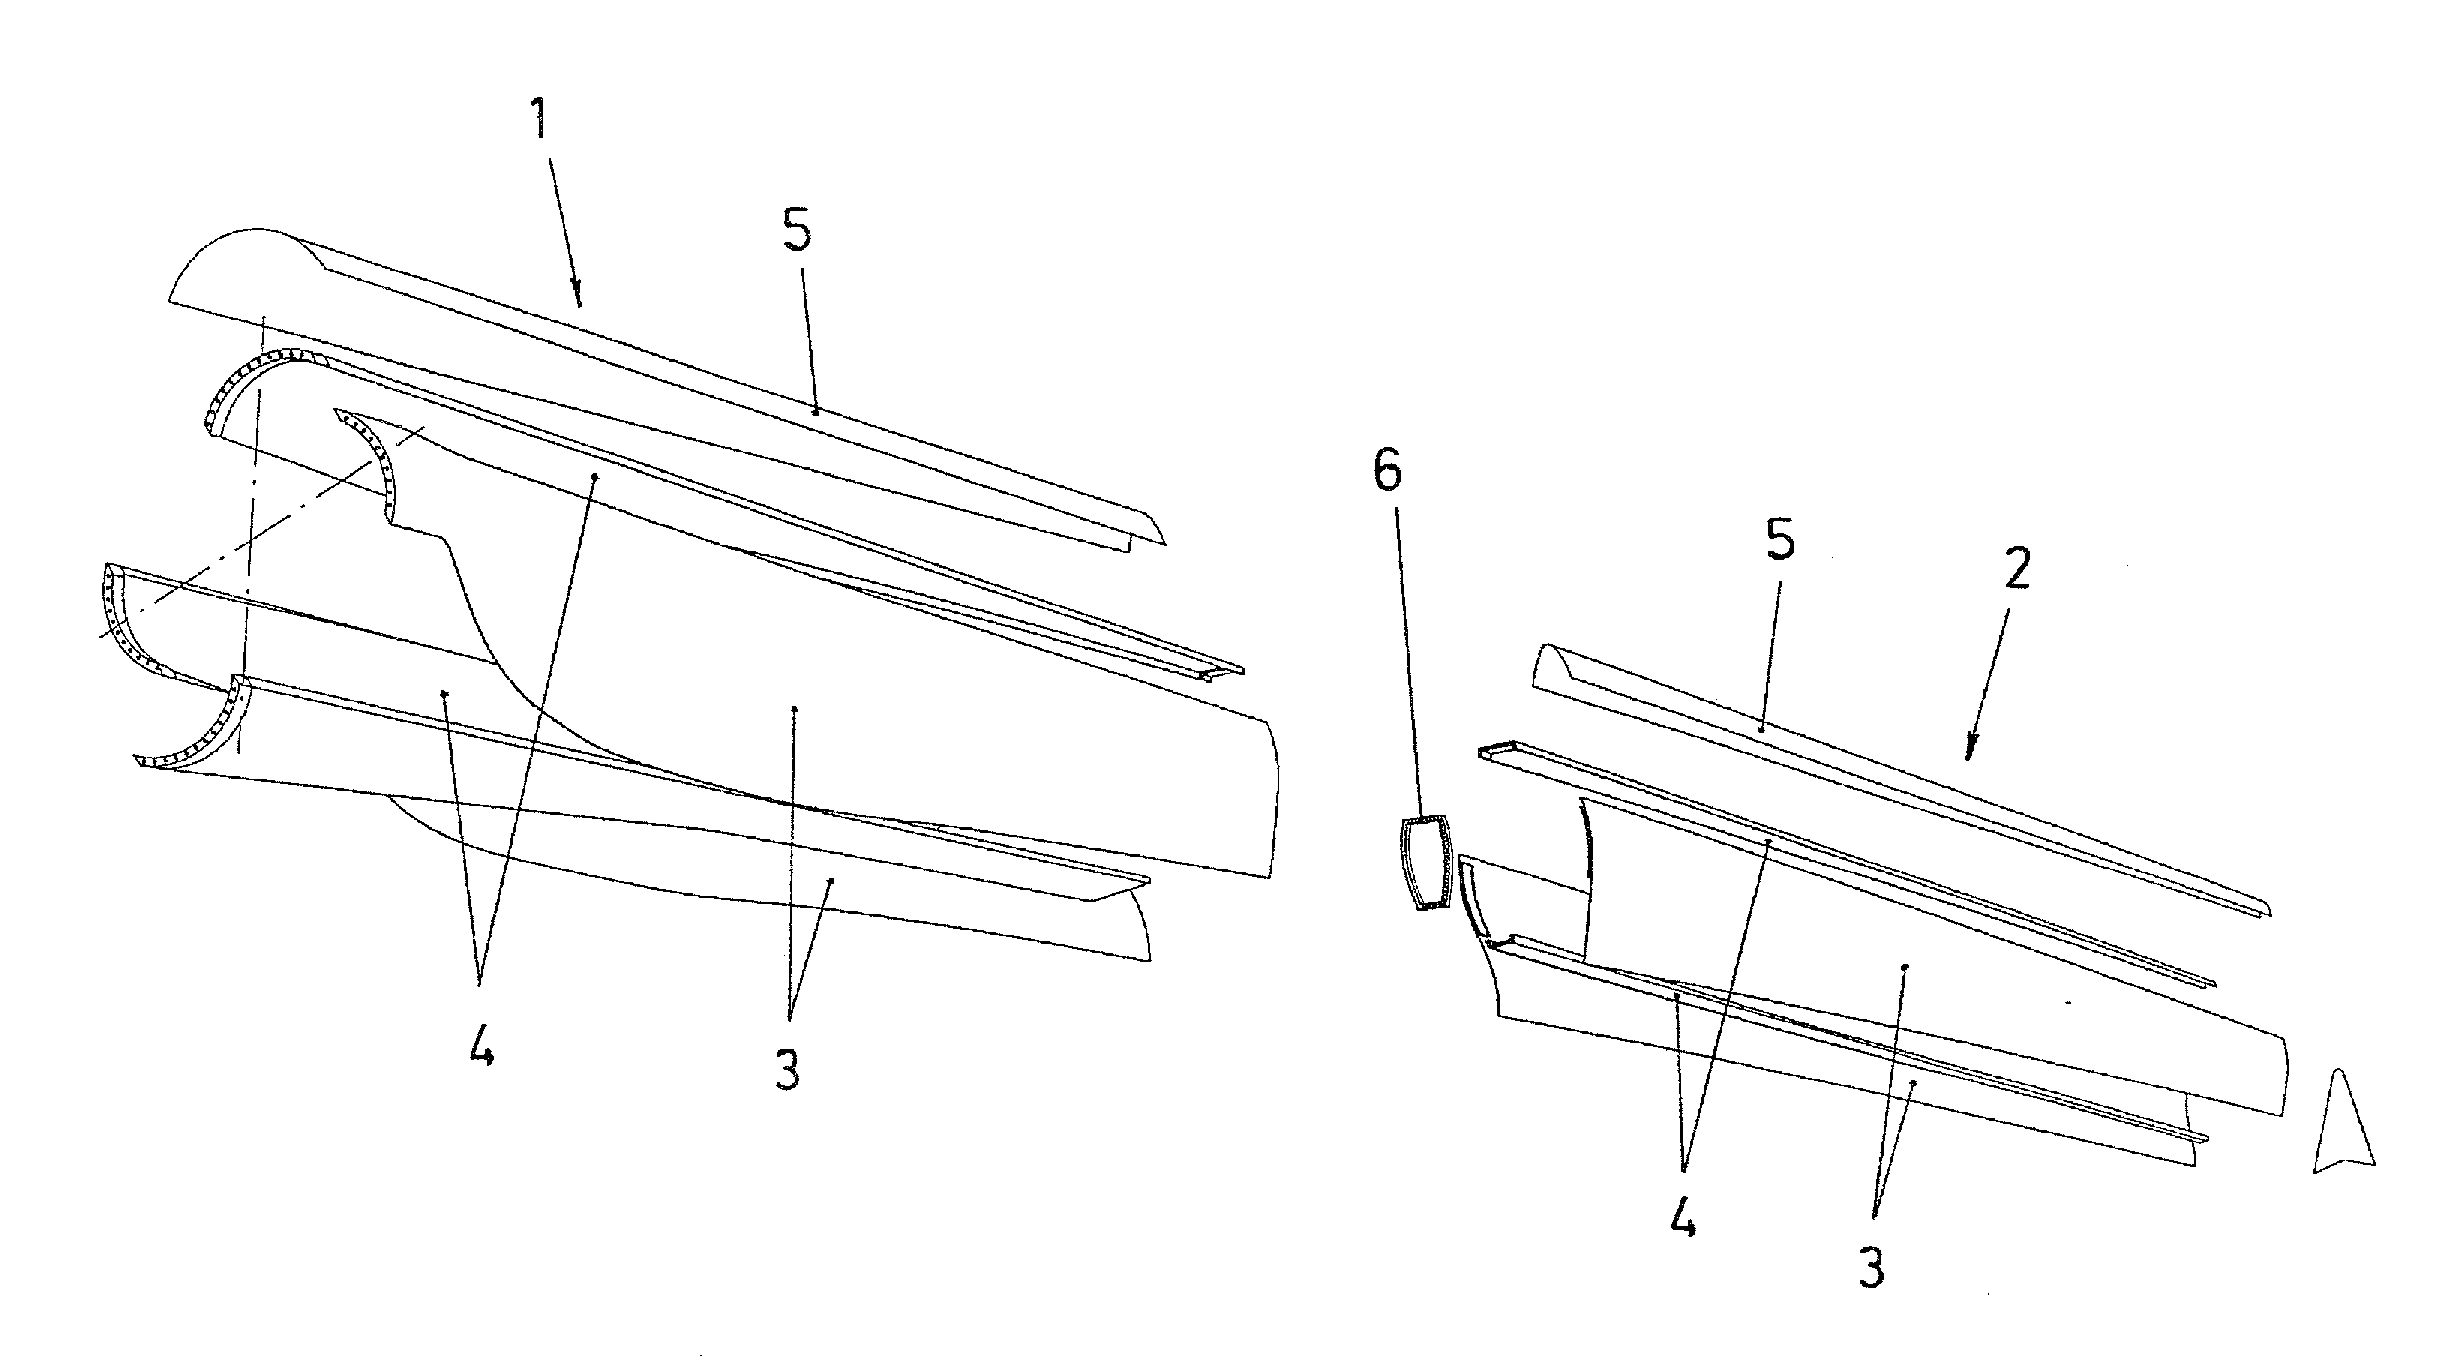 System for connecting wind generator blade sections